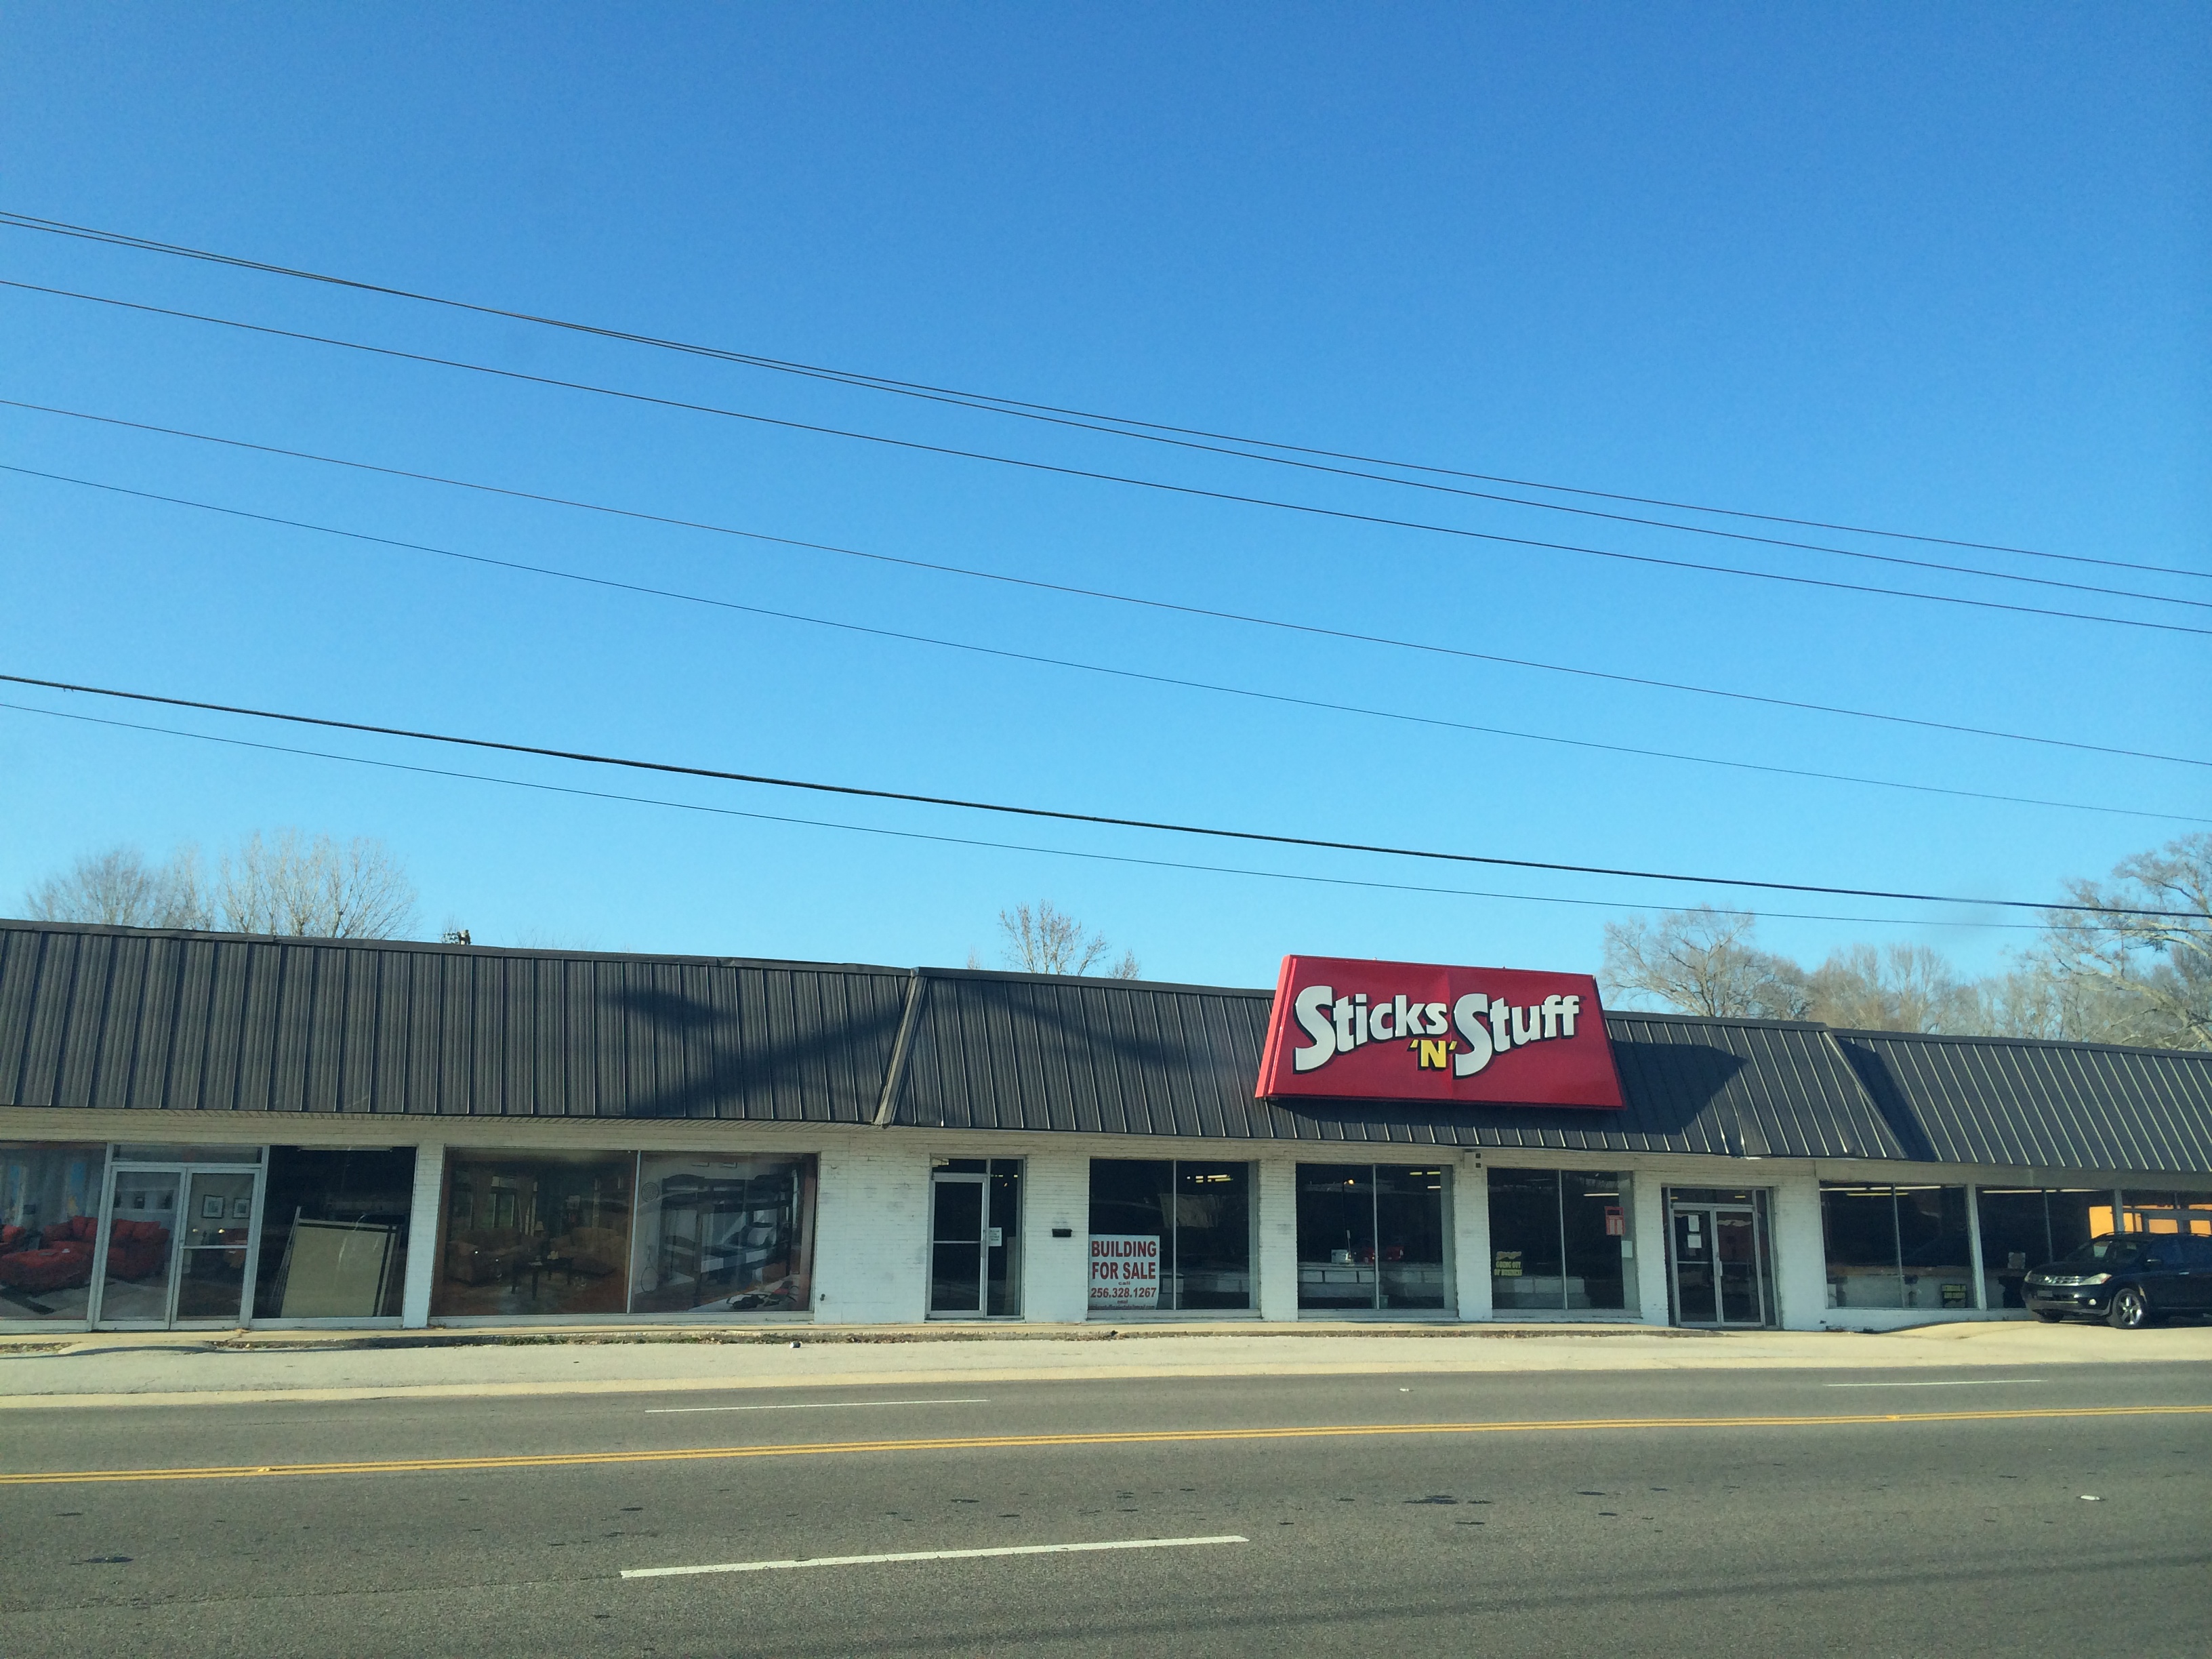 Trussville approves purchase of former Sticks ‘N’ Stuff building